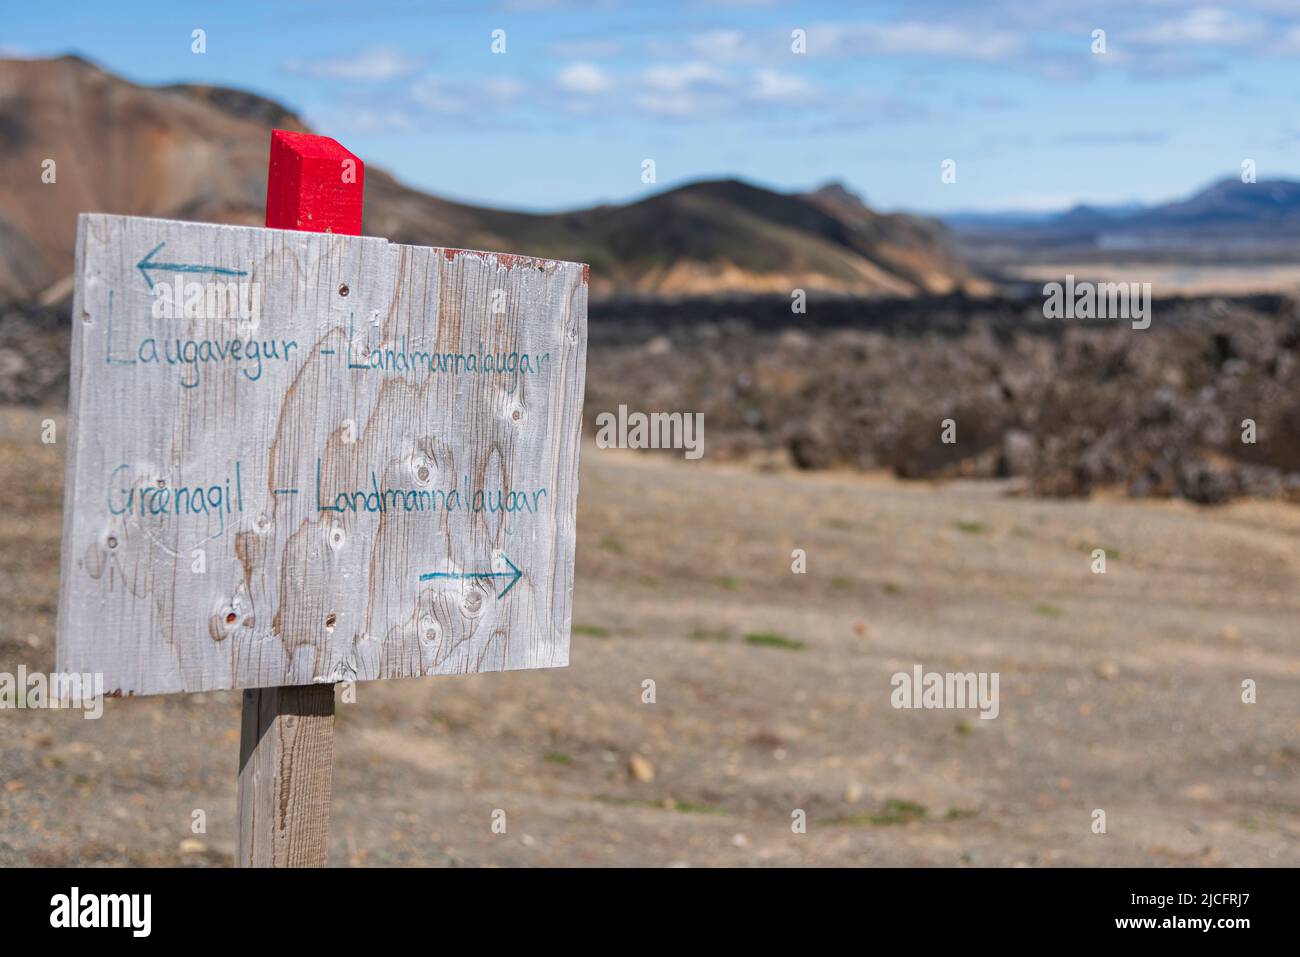 Laugavegur hiking trail is the most famous multi-day trekking tour in Iceland. Landscape photo from the area around Landmannalaugar, starting point of the long-distance hiking trail in the highlands of Iceland near the volcano Hekla. Signpost Graenagil made of wood, handwritten. Stock Photo